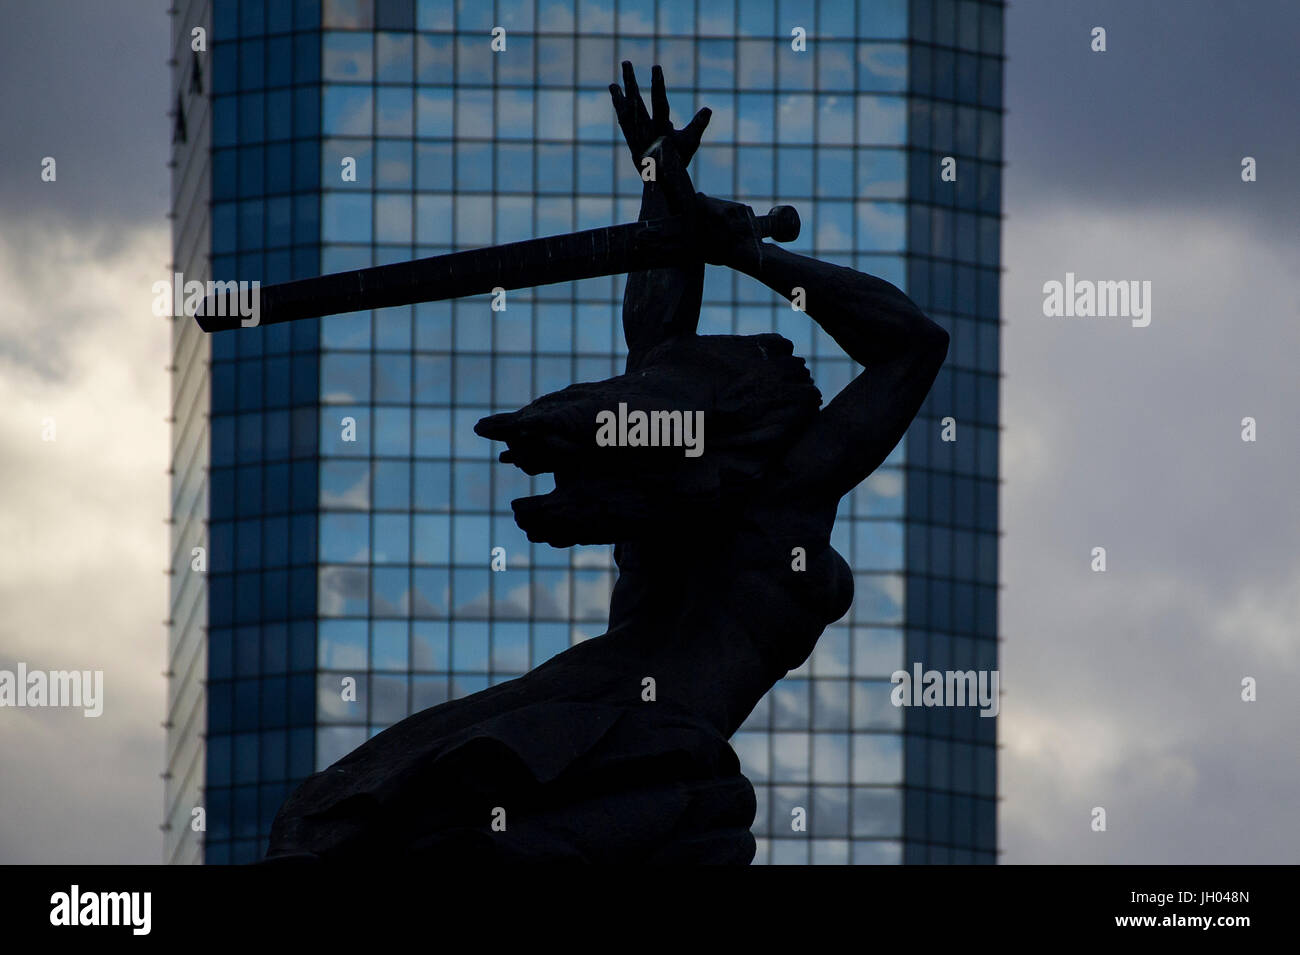 The Monument to the Heroes of Warsaw also known as the Warsaw Nike and Blekitny Wiezowiec (Blue Skyscraper) in Warsaw, Poland. 6 April 2017 © Wojciech Stock Photo